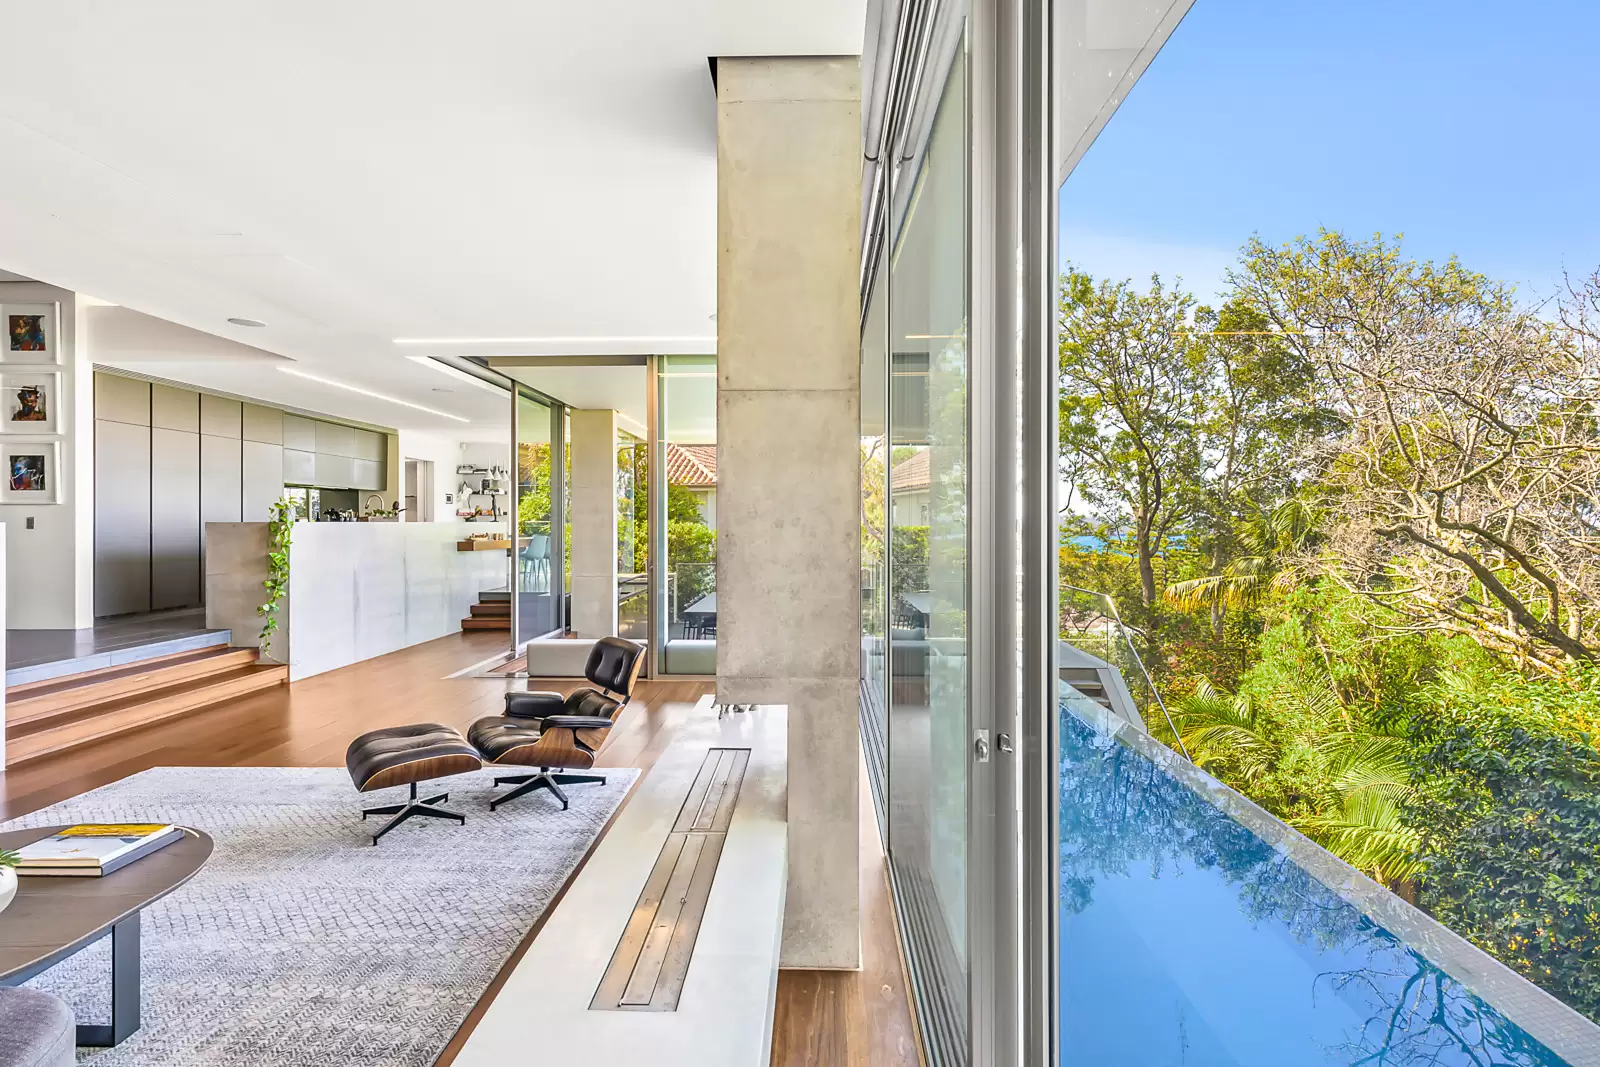 Photo #7: 25 Wentworth Road, Vaucluse - For Sale by Sydney Sotheby's International Realty